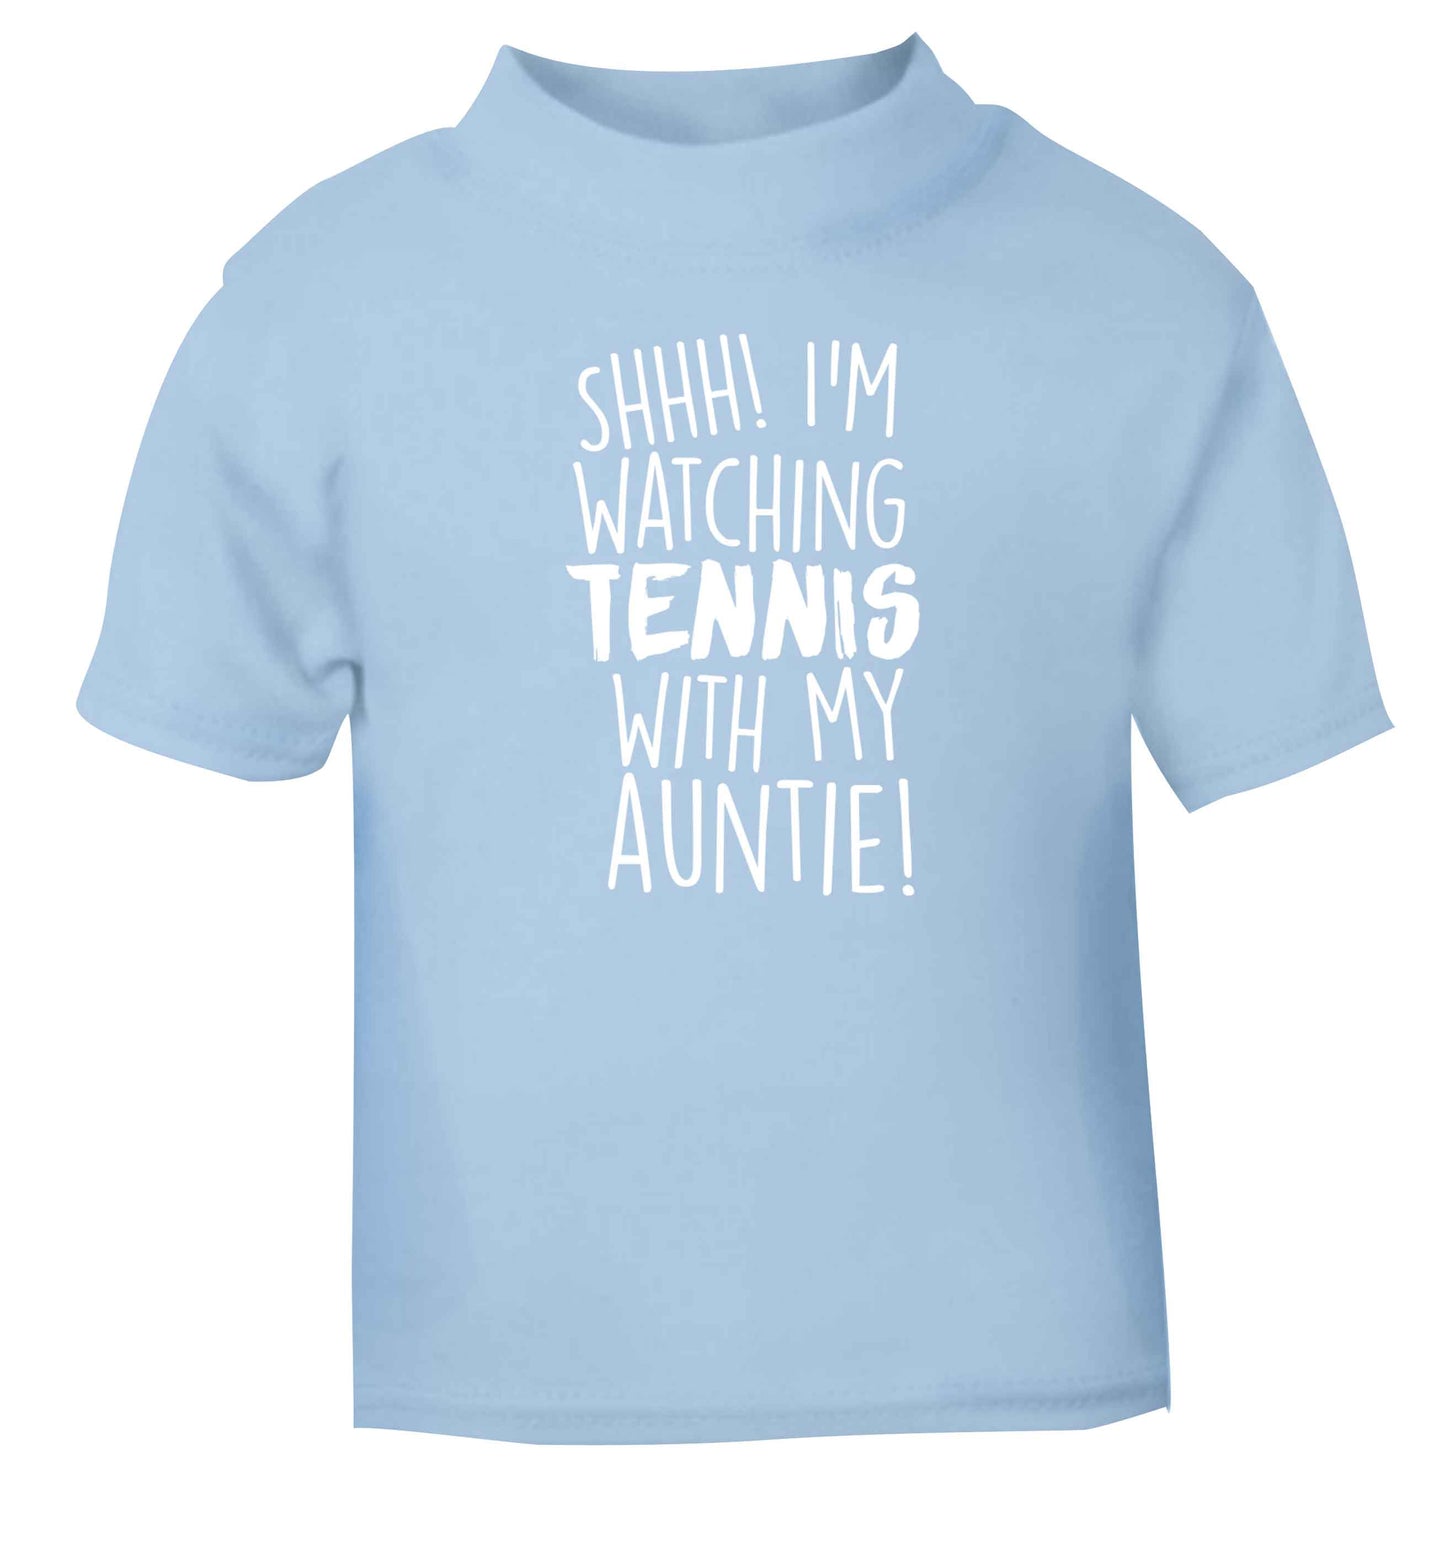 Shh! I'm watching tennis with my auntie! light blue Baby Toddler Tshirt 2 Years